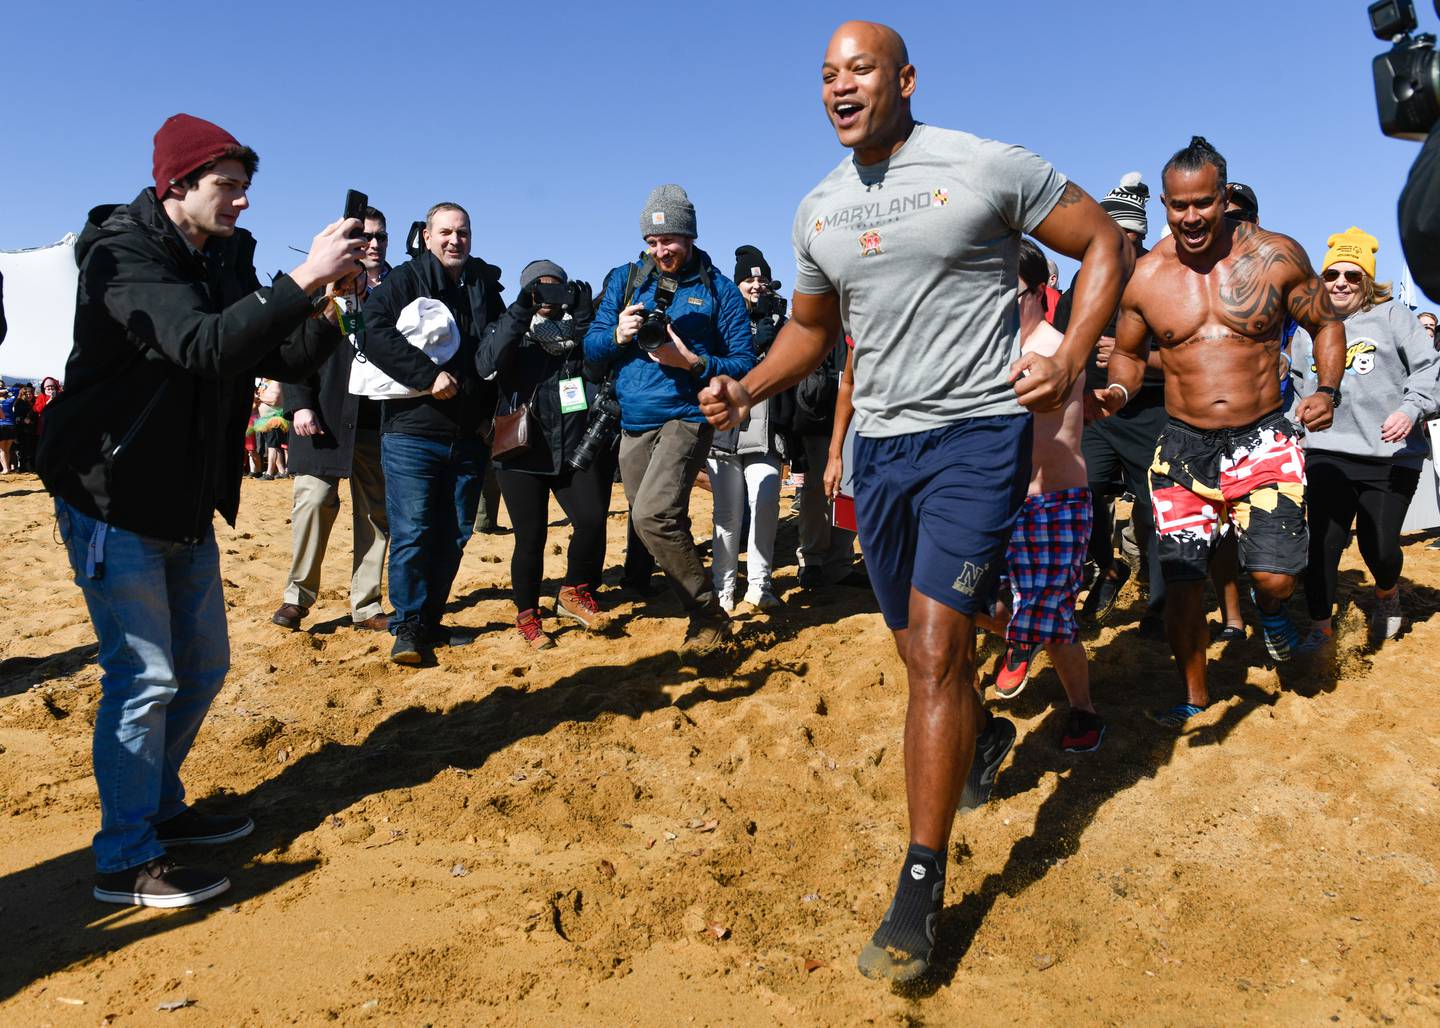 Gov. Wes Moore participates in the Maryland State Police Polar Bear Plunge to benefit Special Olympics Maryland, Saturday, Feb. 4, 2023 at Sandy Point State Park in Annapolis.